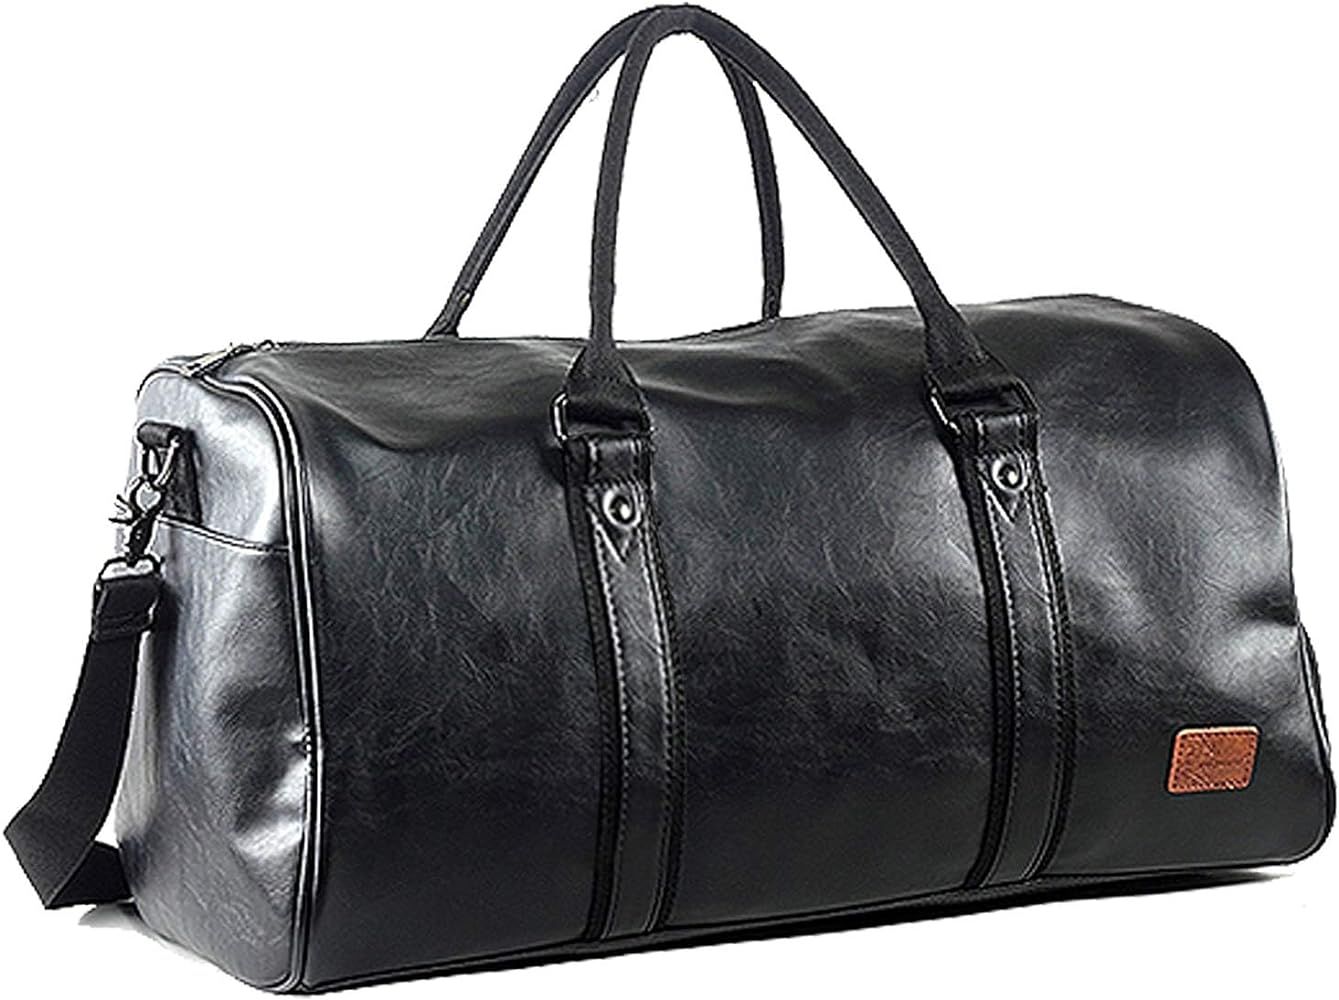 Weekender Oversized Travel Duffel Bag with Shoe Pouch, Leather Carry On Bag | Amazon (CA)